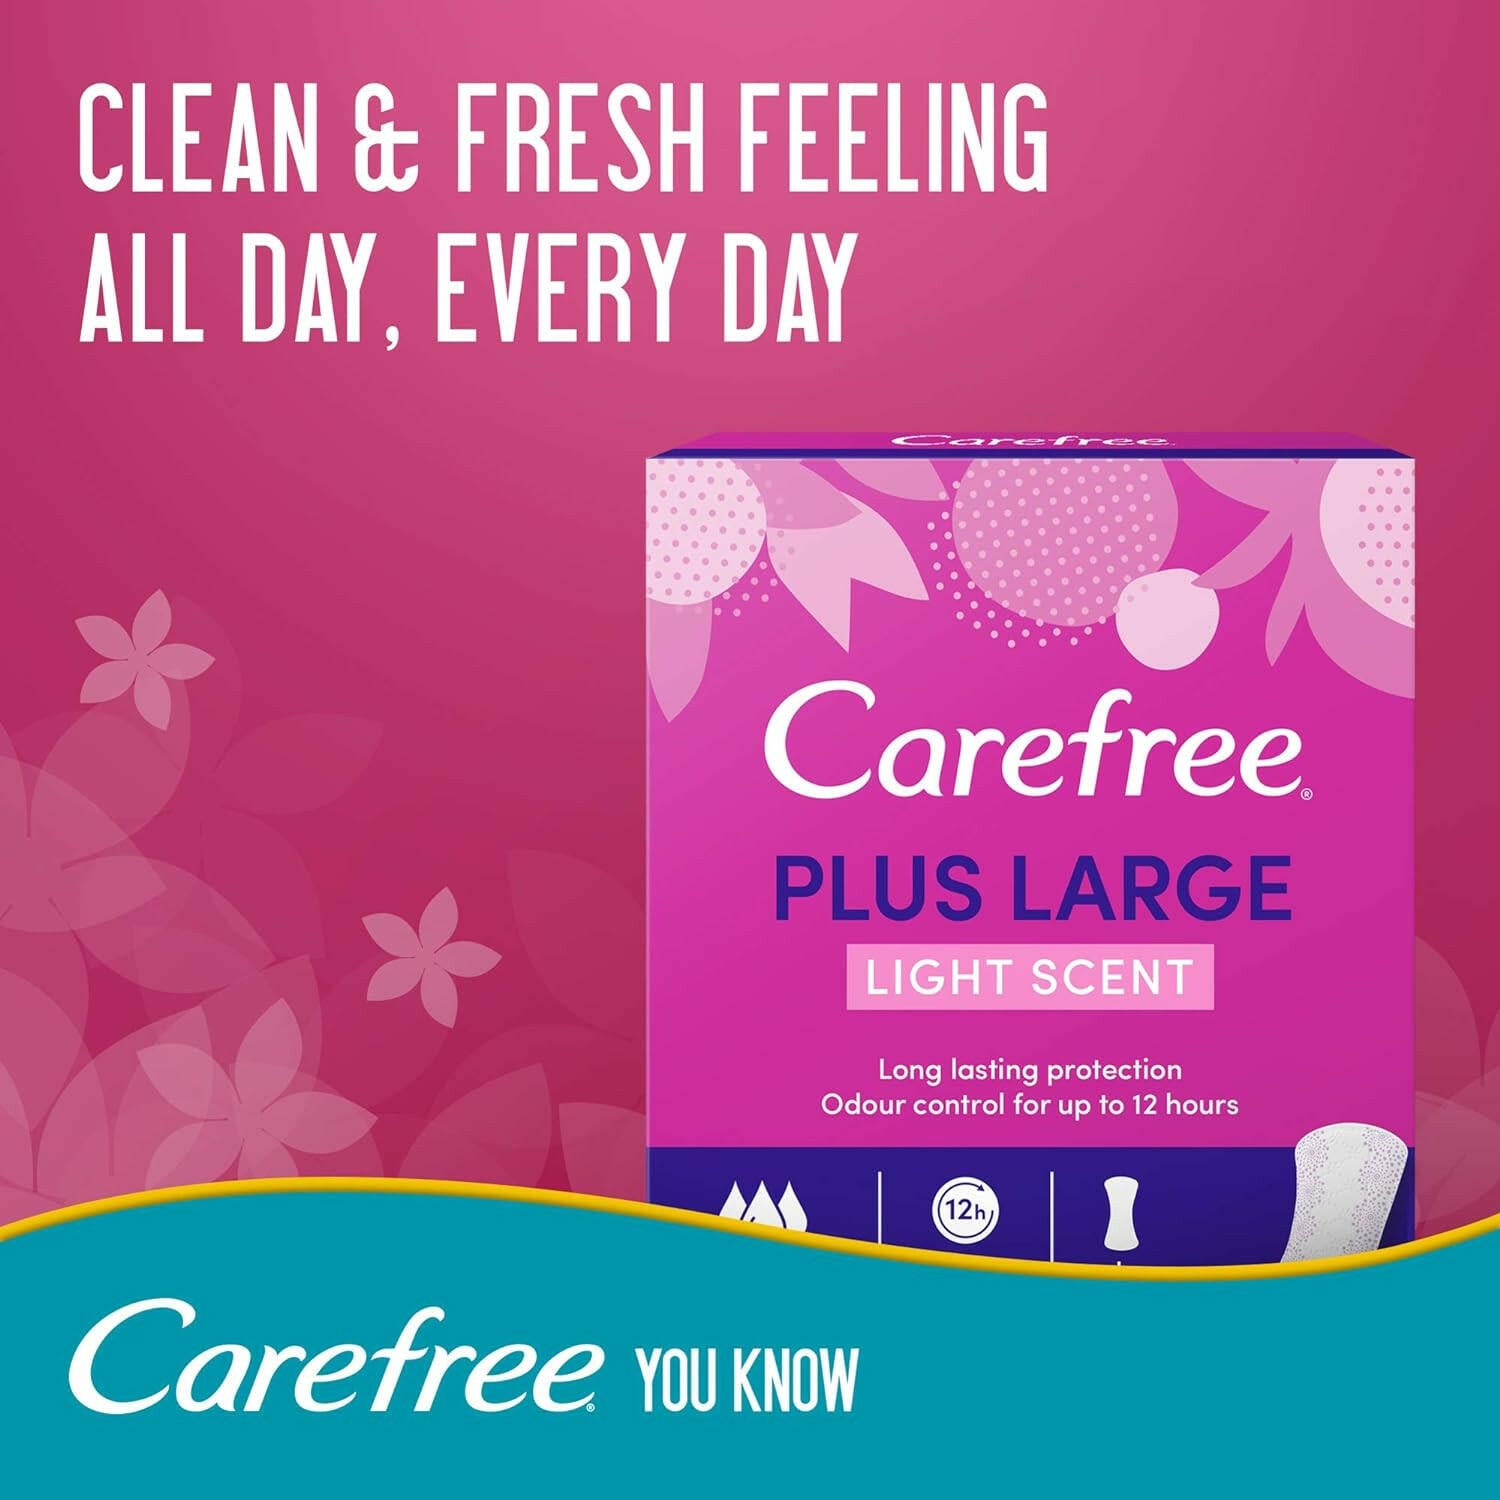 Carefree Daily Panty Liners, Plus Large, Light Scent, 48pcs